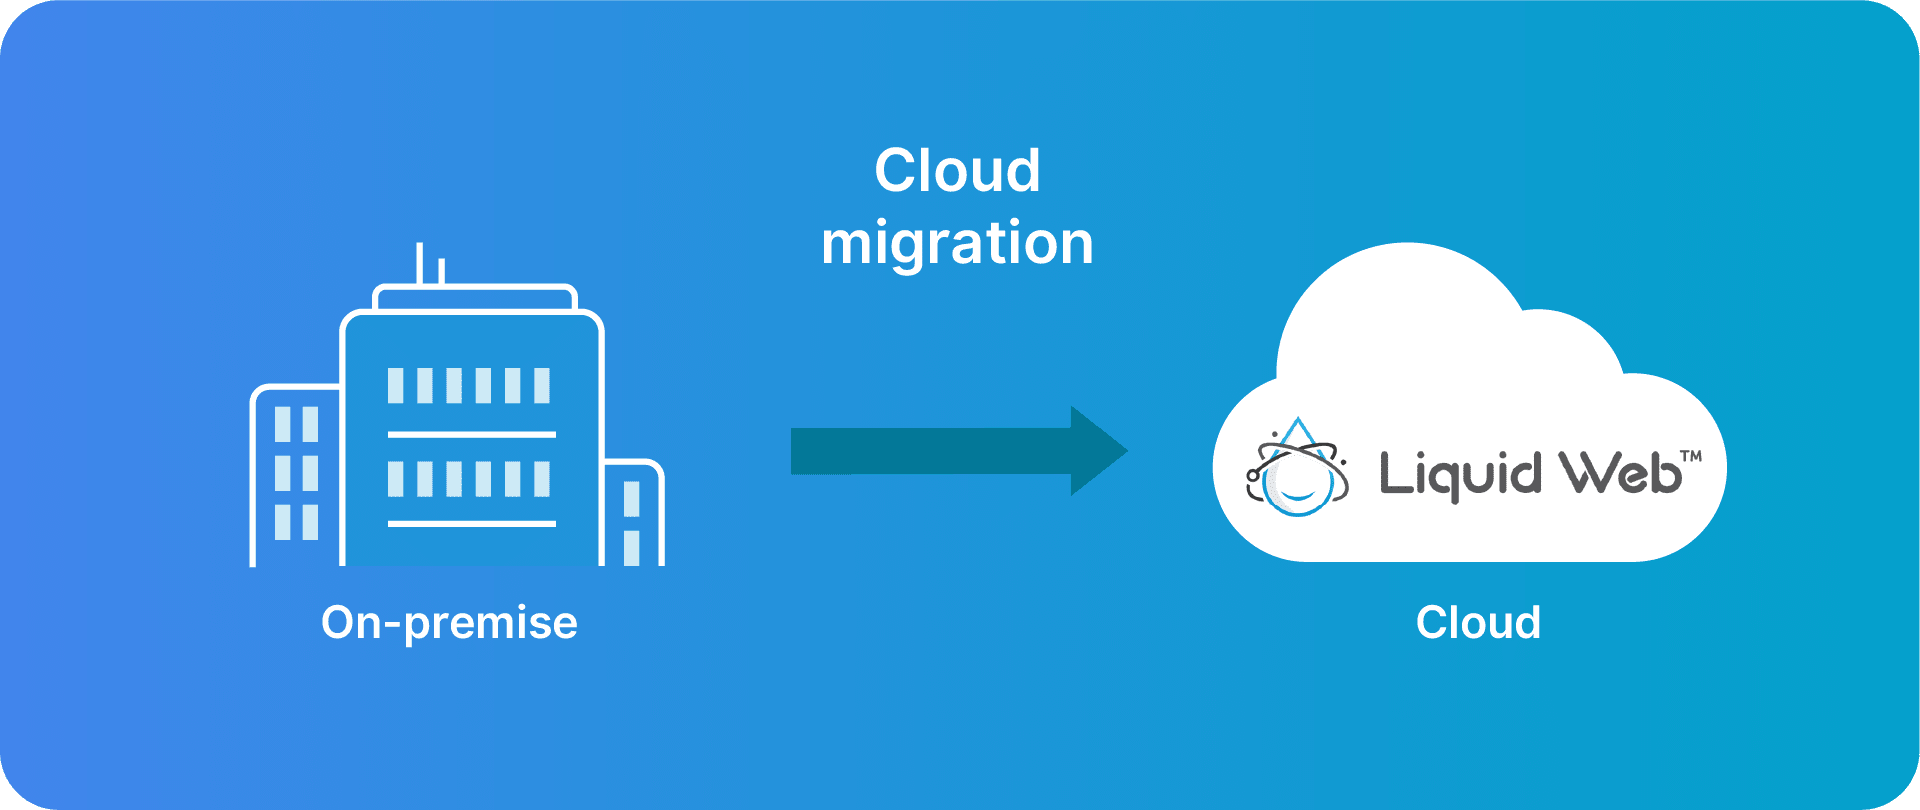 Migration from an on-premise IT infrastructure to the cloud.